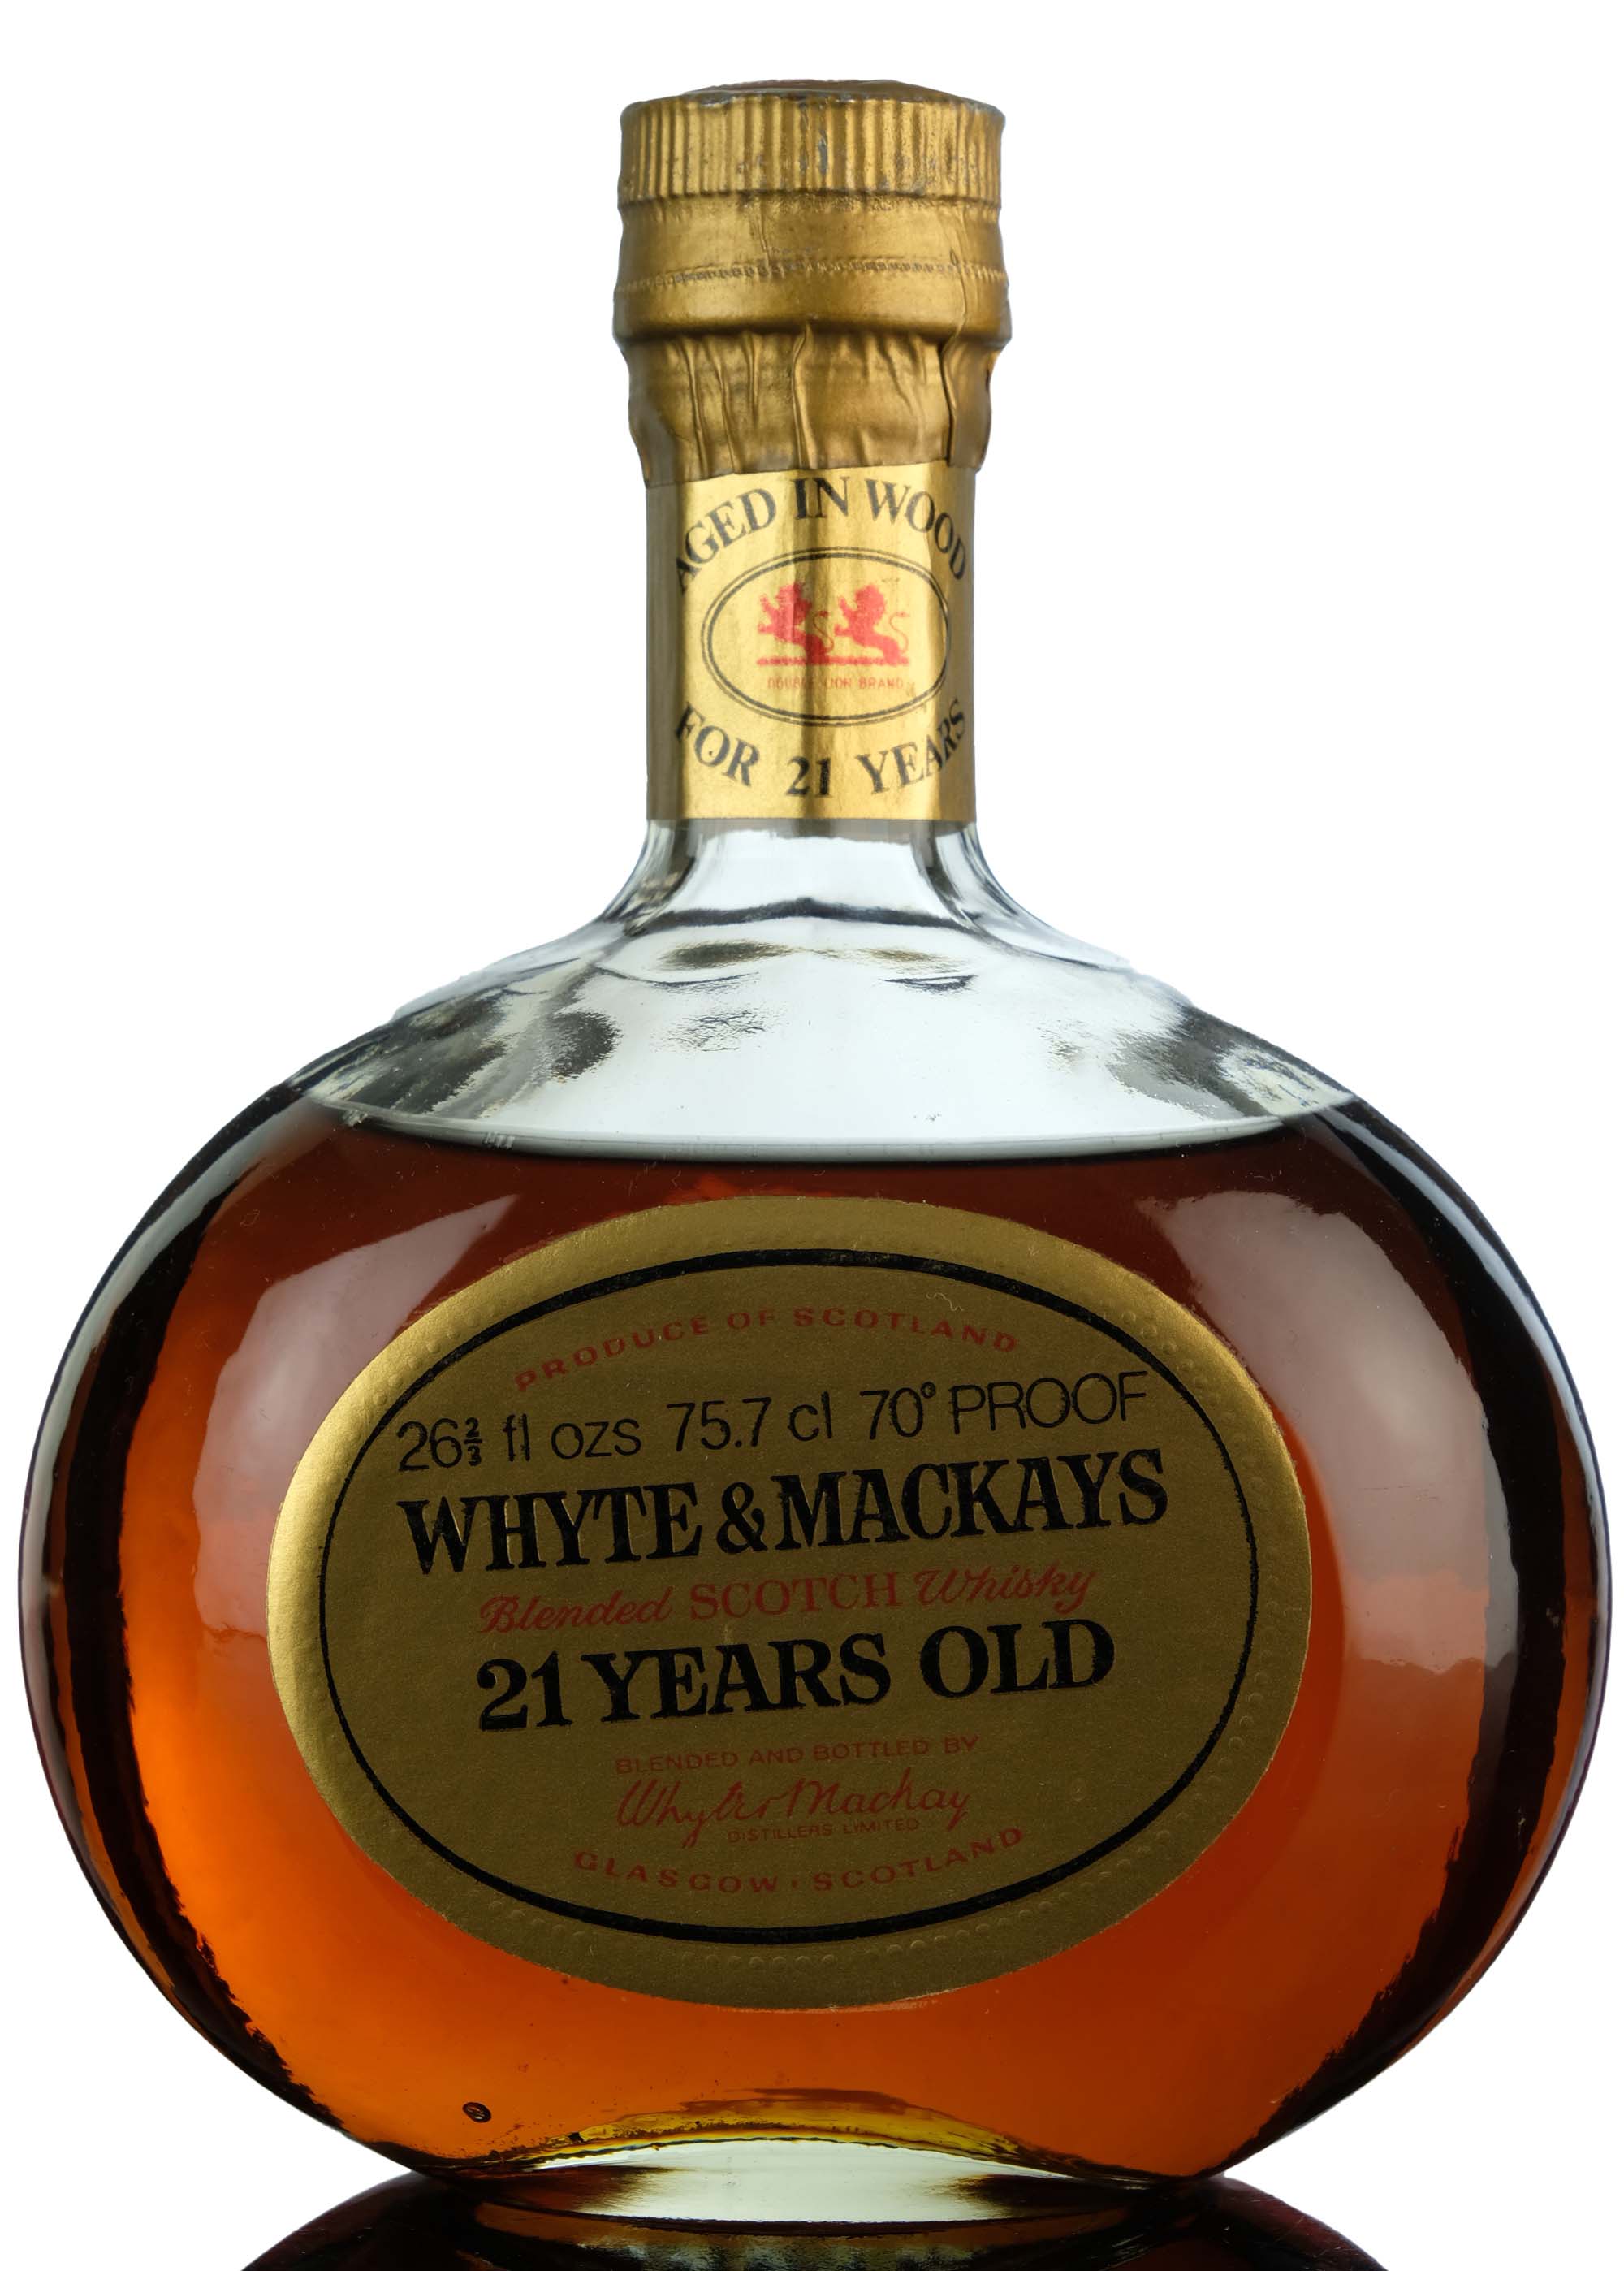 Whyte & Mackay 21 Year Old - Late 1970s